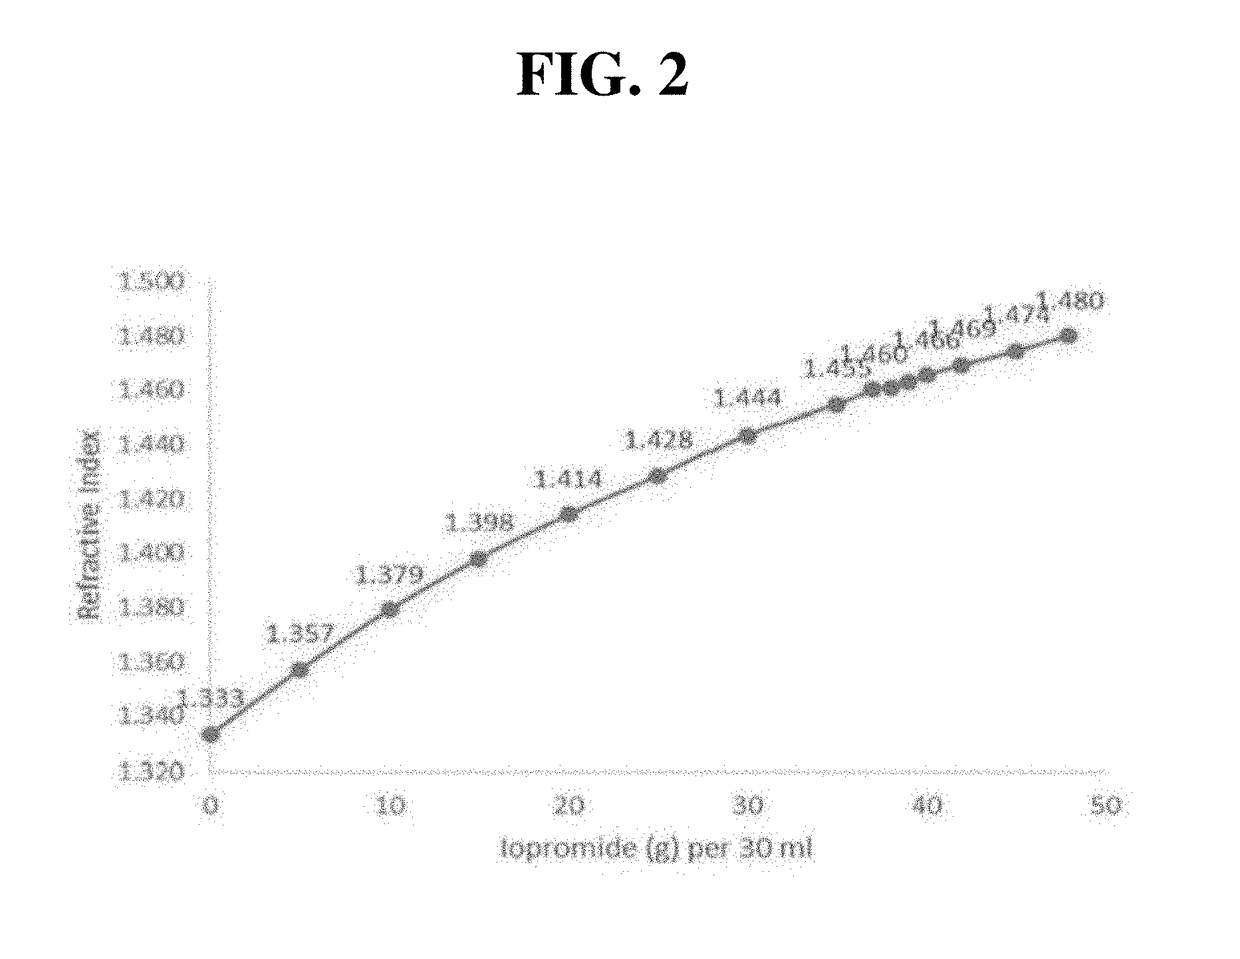 Refractive index matching composition for biological tissue